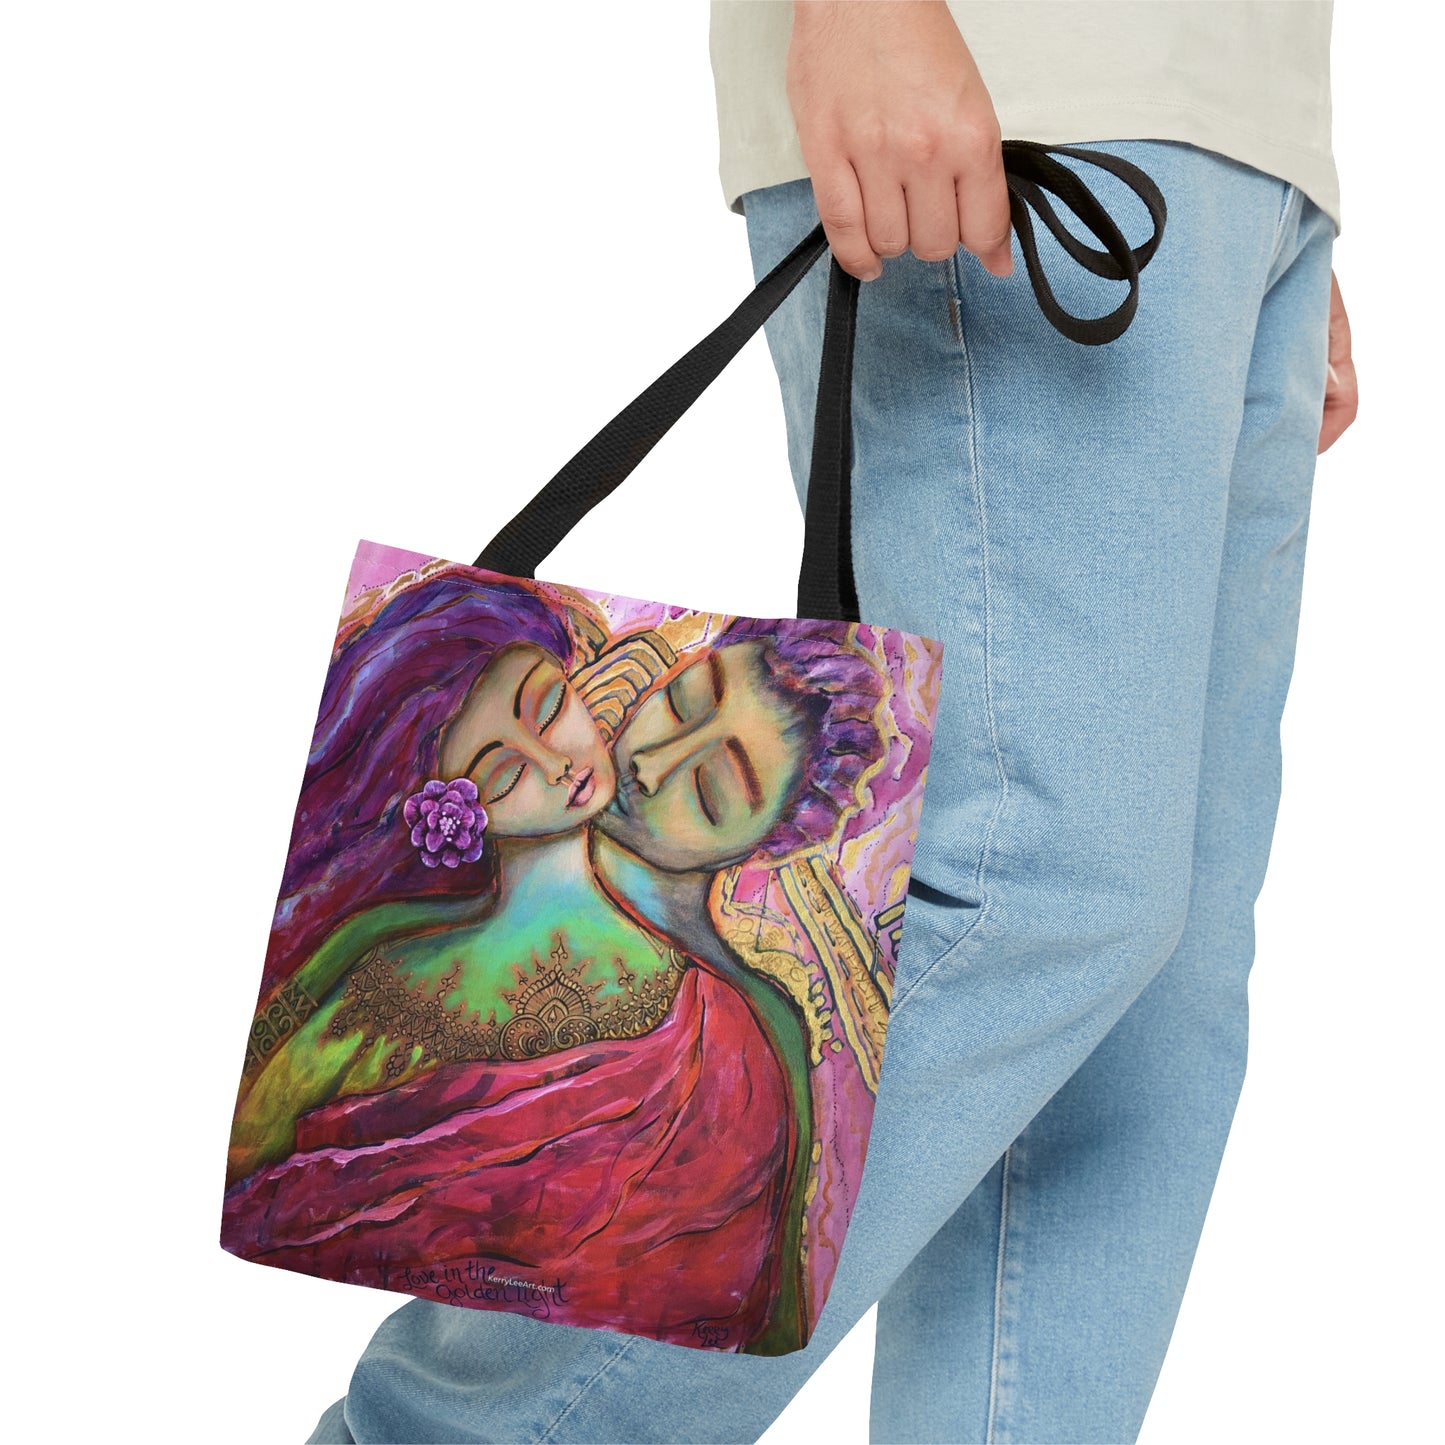 "Love in the Golden Light" Printed Tote Bag